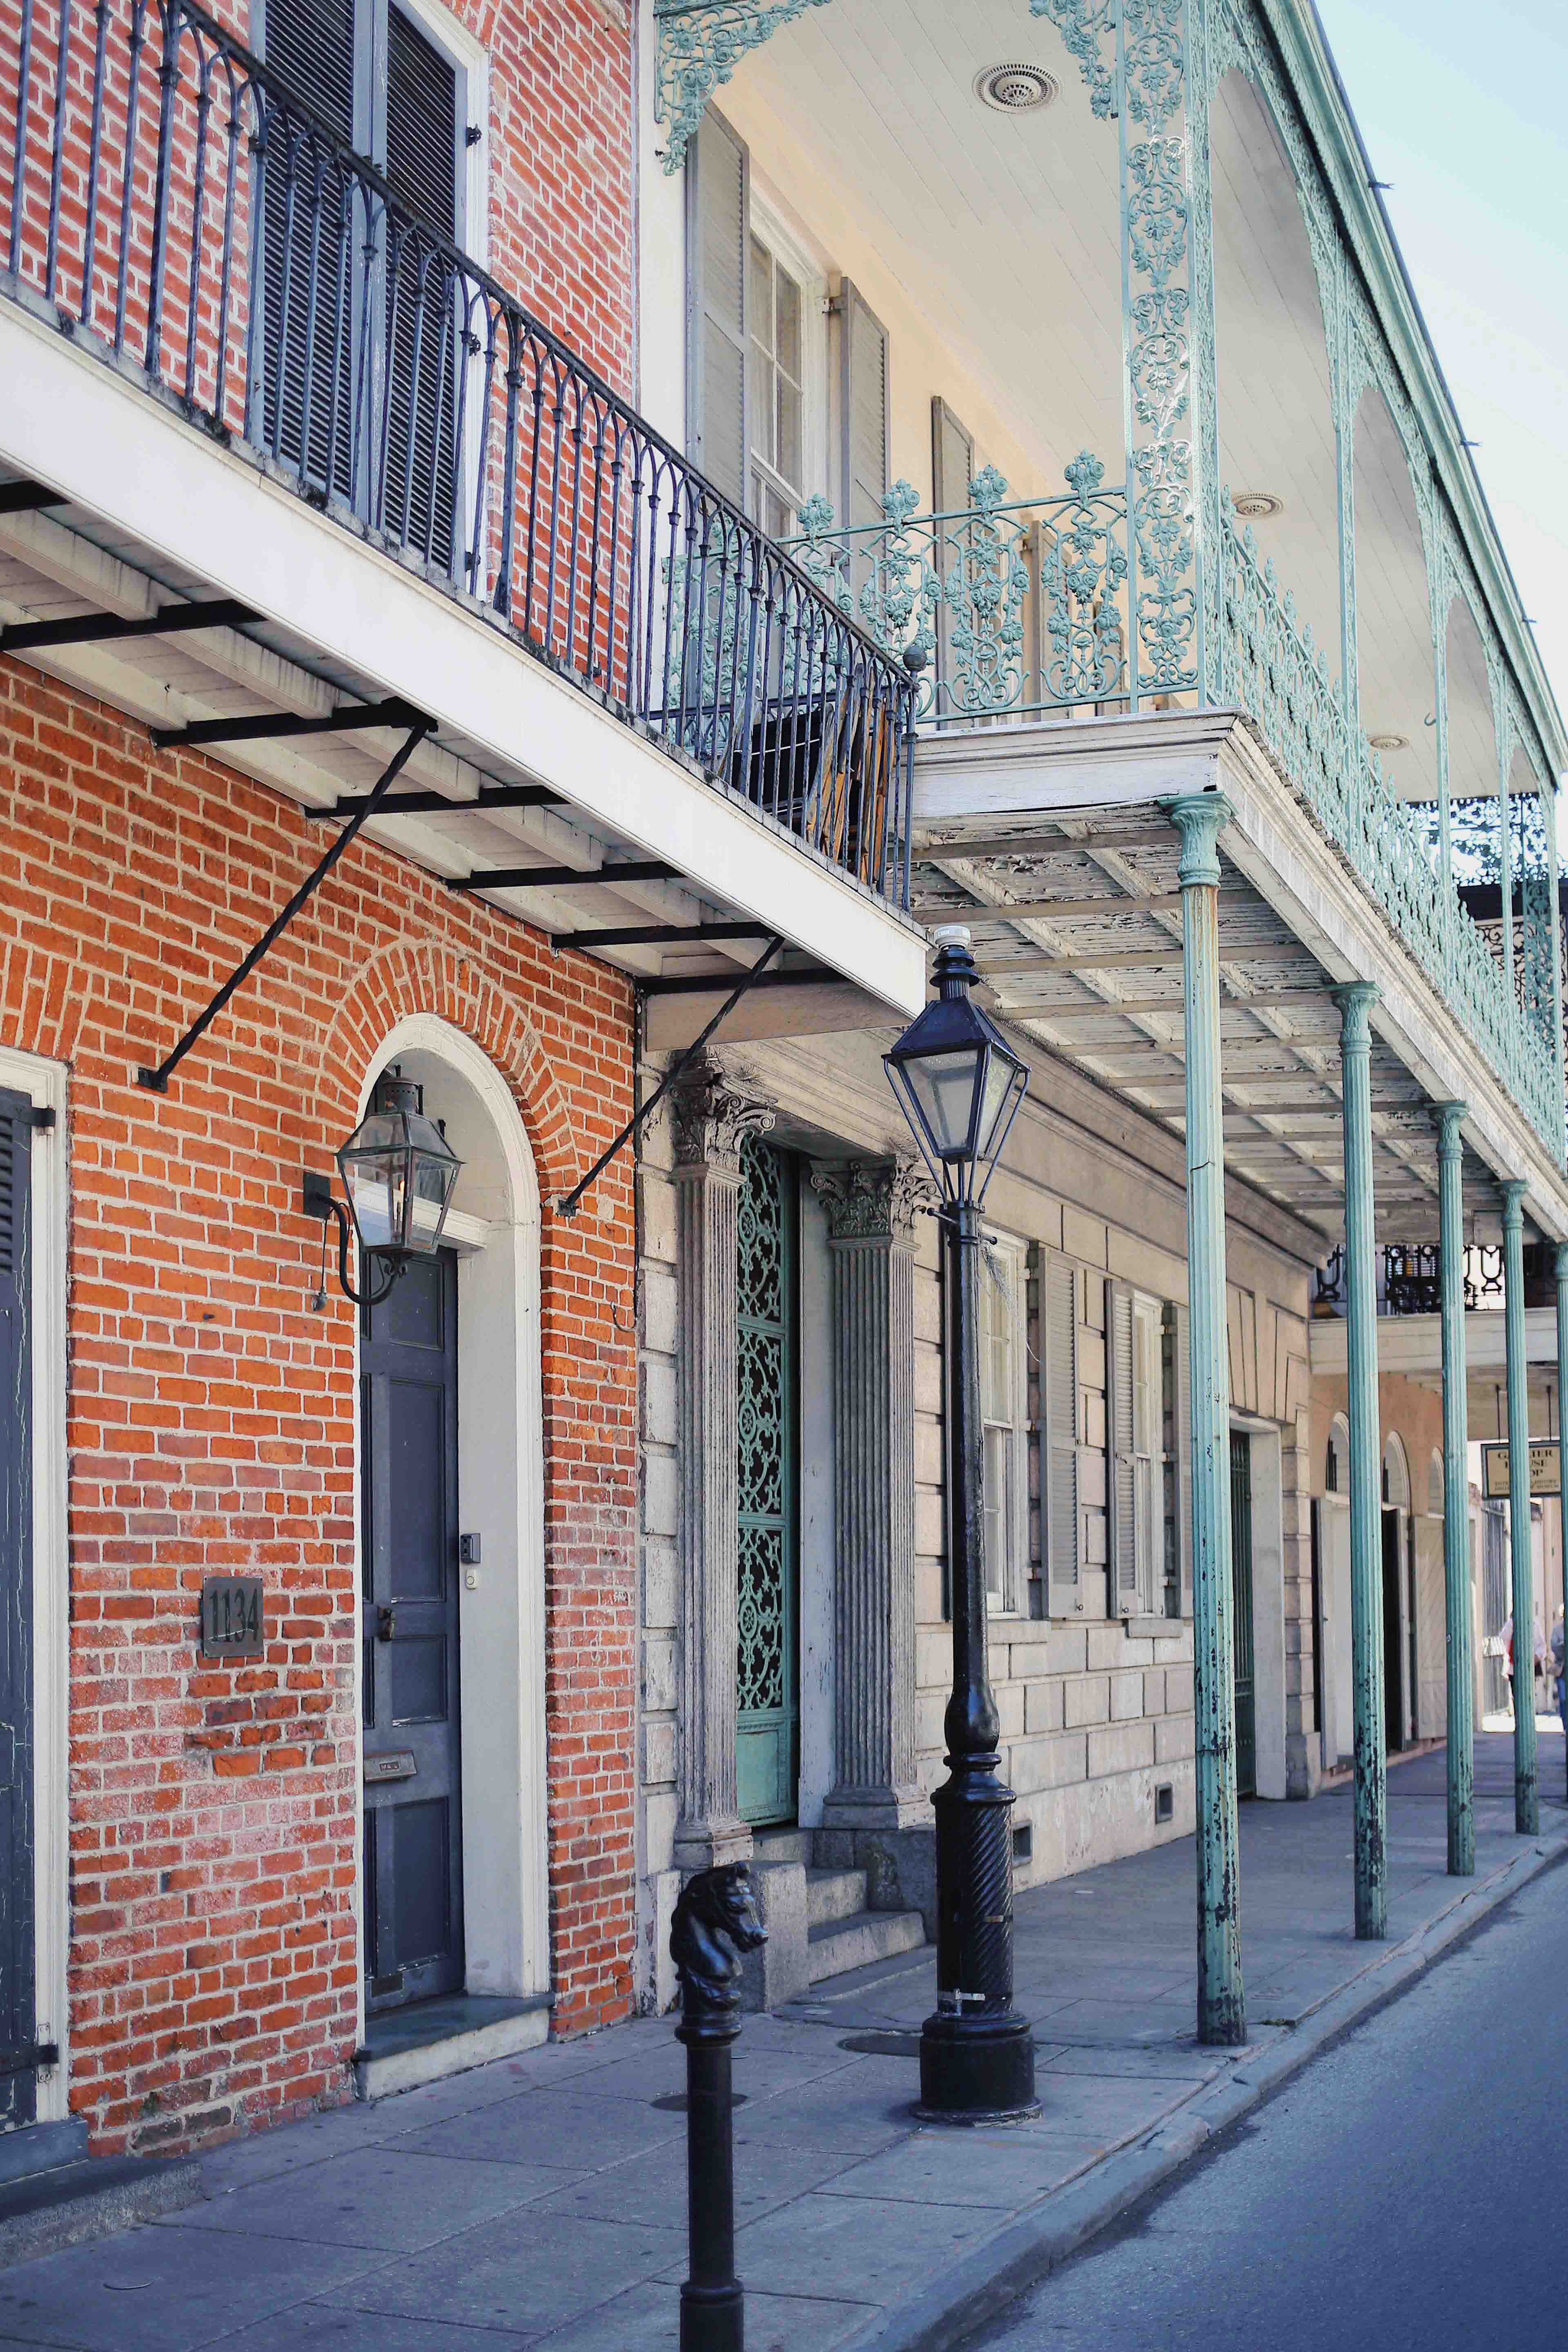 Spanish architecture visit of the French Quarter in New Orleans - Visit of the French Quarter in New Orleans - Horse French Quarter New Orleans Travel Guide - NOLA City guide - by fashion blogger Julia Comil